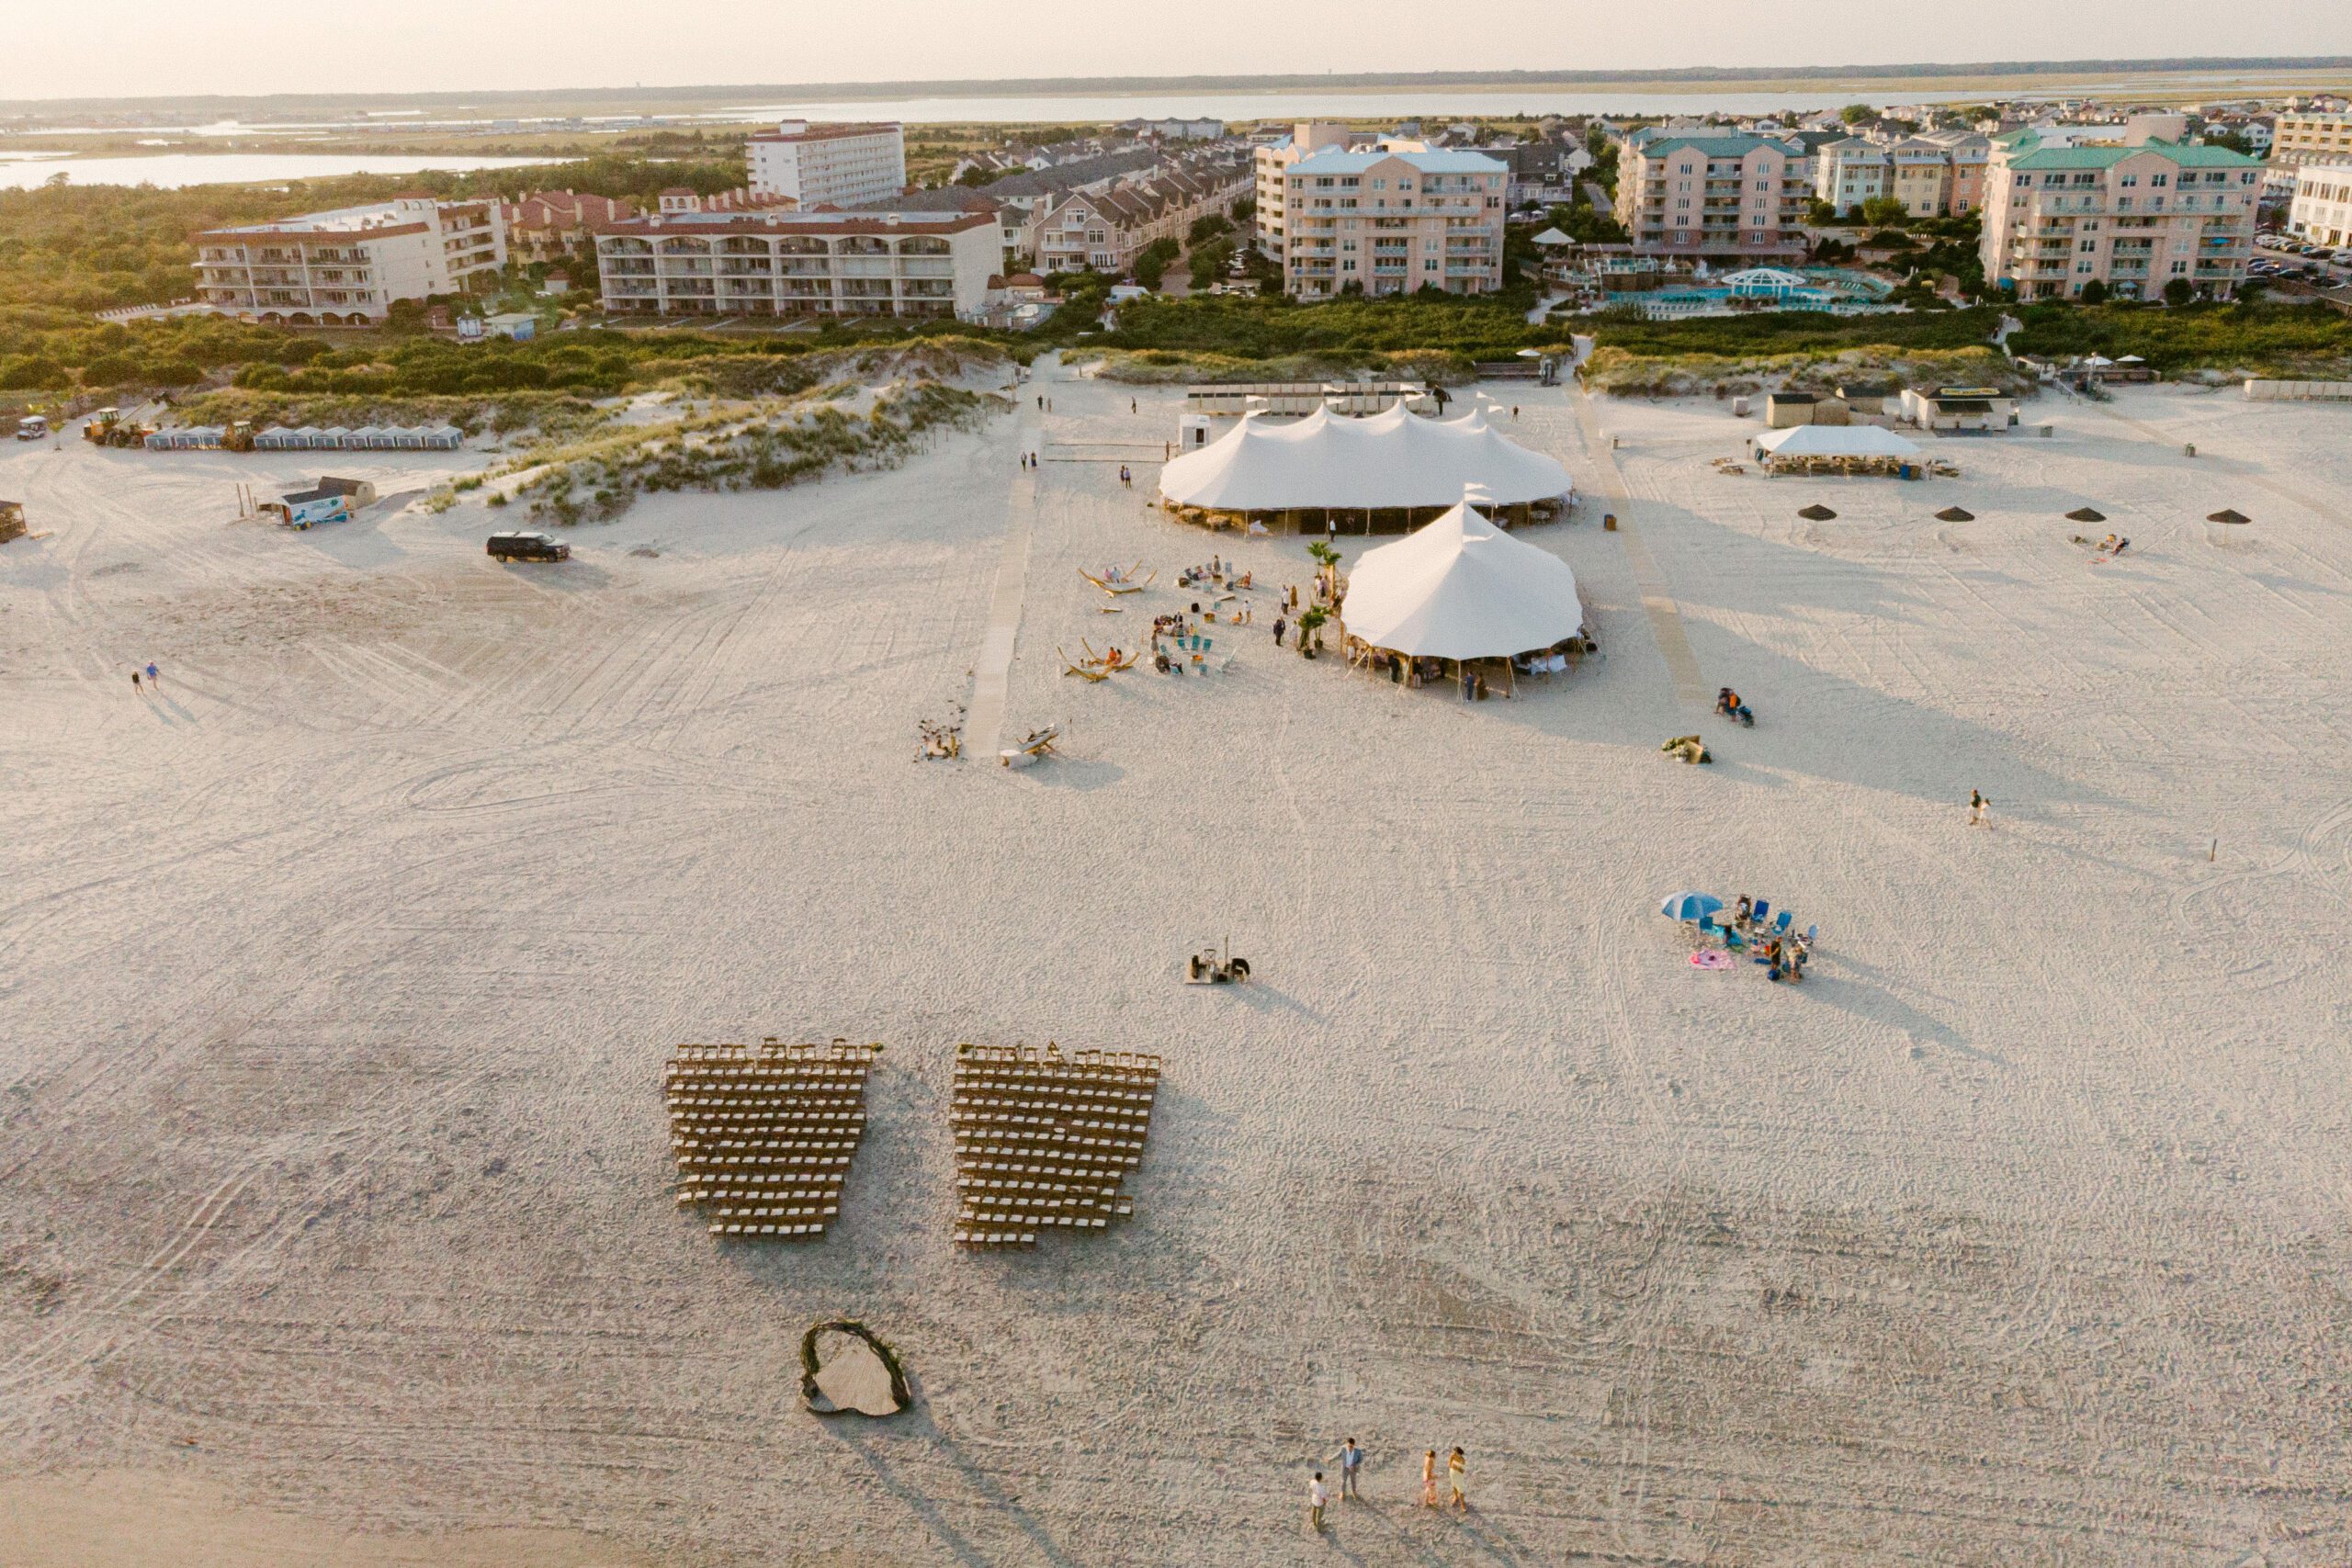 drone view of large white tents set up on beach, with chairs in rows for wedding ceremony